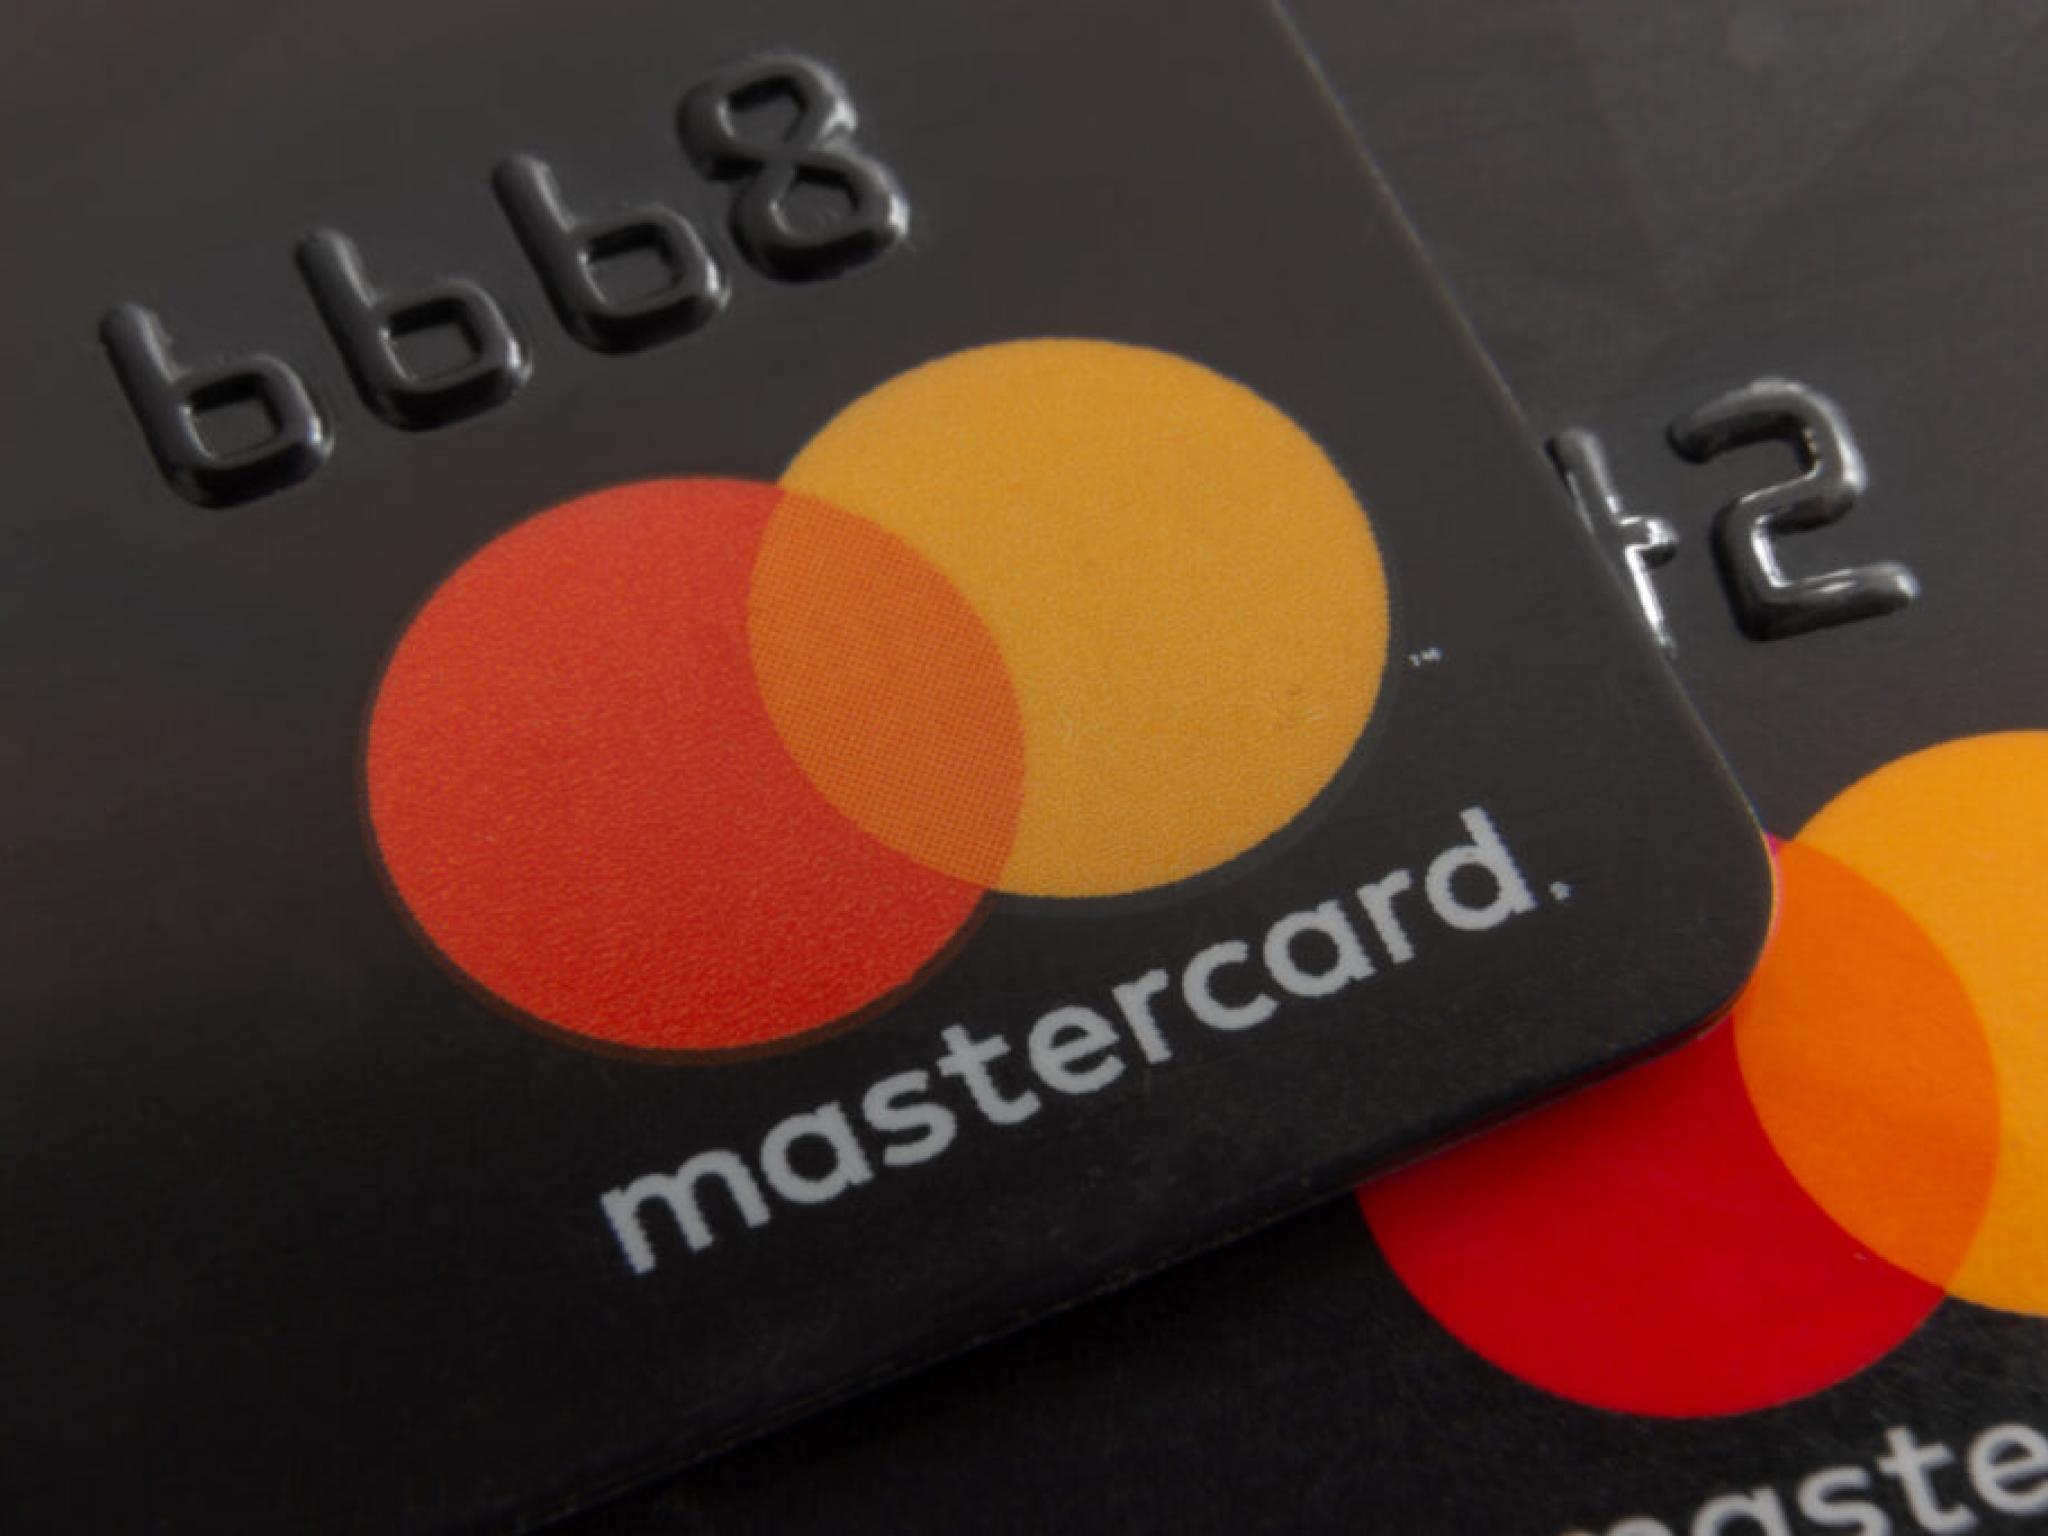  mastercard-tends-to-exceed-wall-street-expectations-but-signals-are-bearish-ahead-of-q1-earnings 